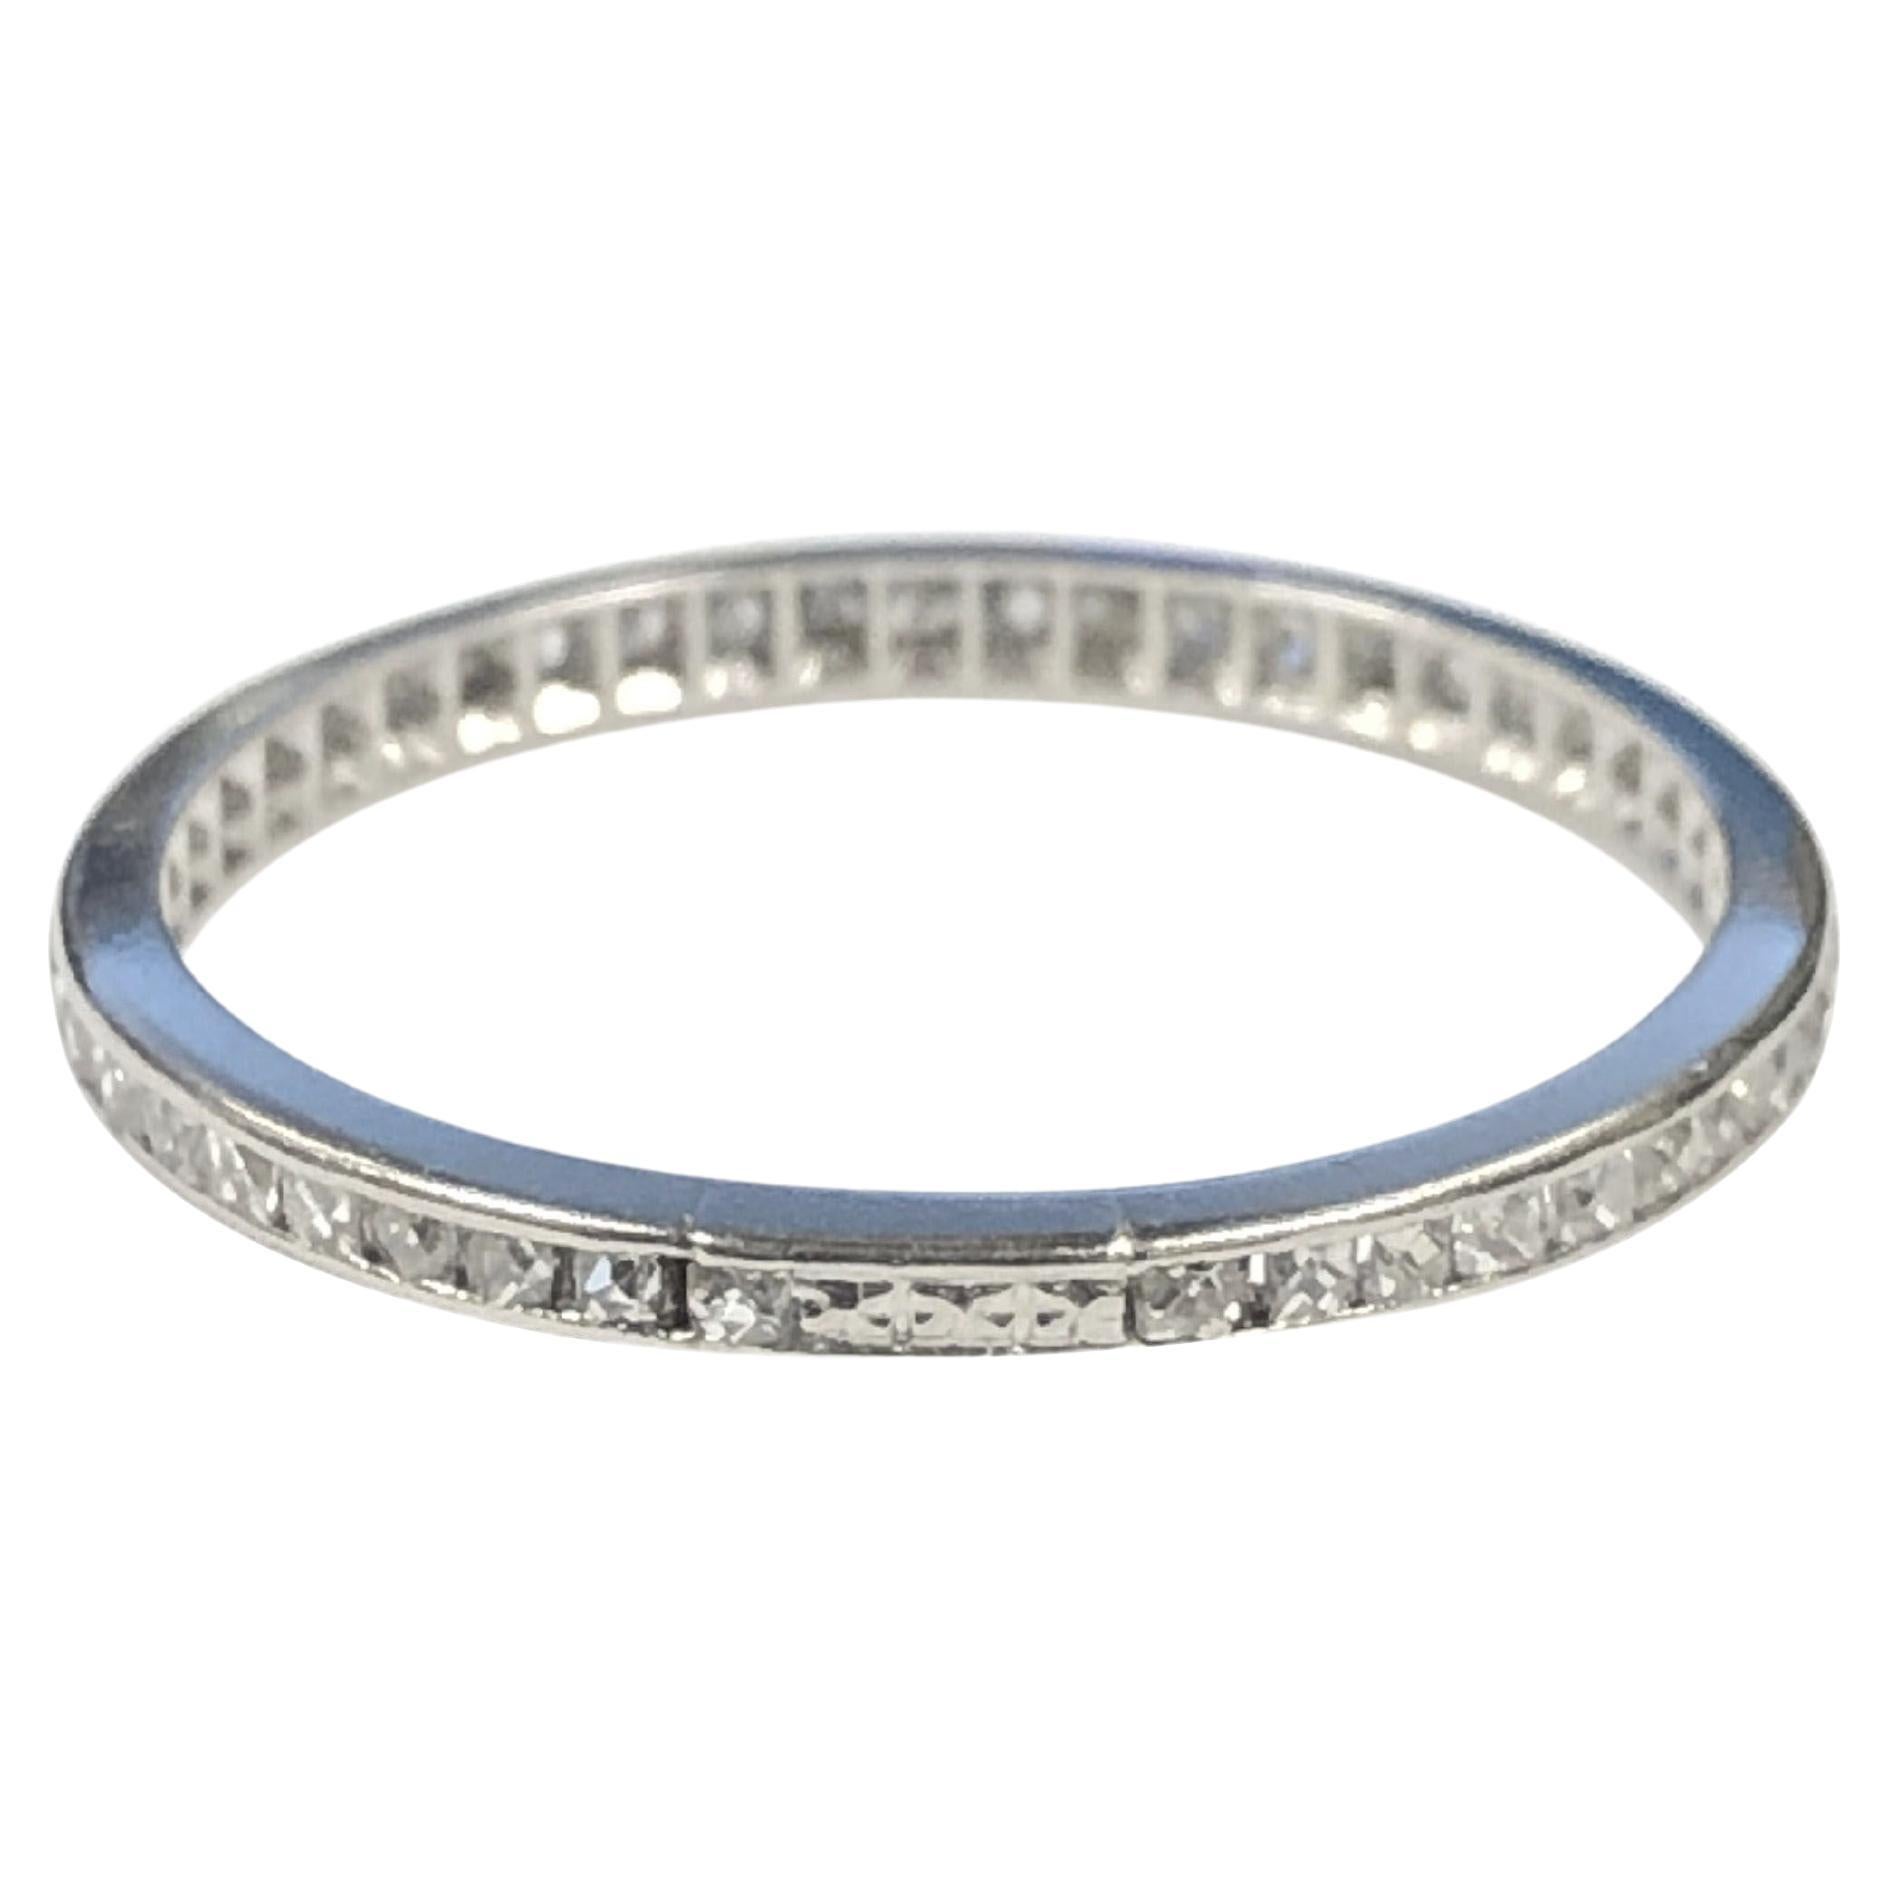 Circa 1920s Platinum Eternity Band Ring, measuring 1.6 M.M. wide, channel set with old French Cut Diamonds totaling approximately .70 Carat. Finger size 6 1/4. 